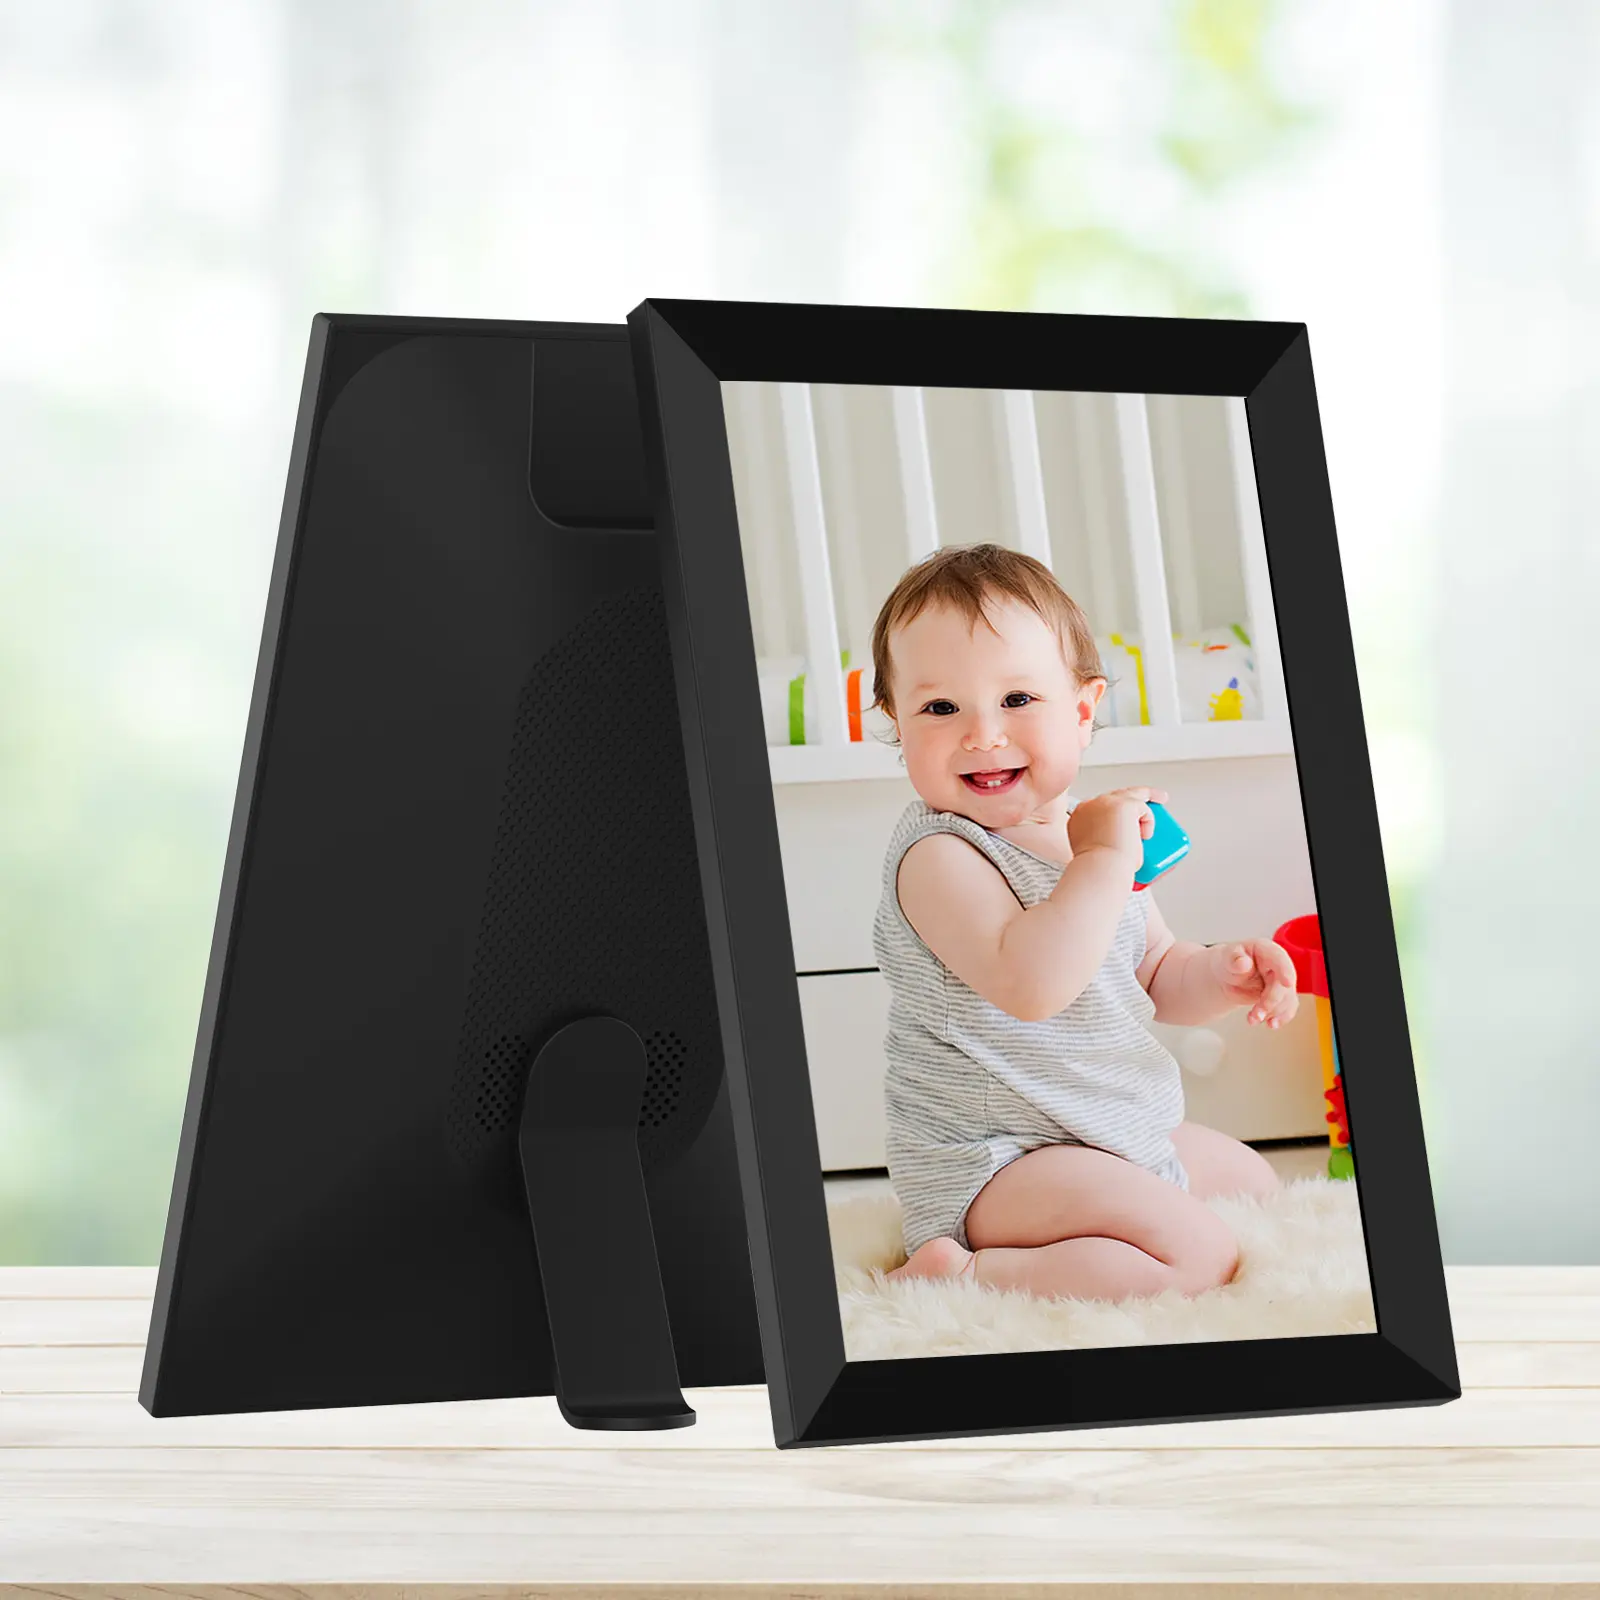 Hot 2023 Electronic Picture Frame video downloads 16GB Storage Digital Picture Photo Frame